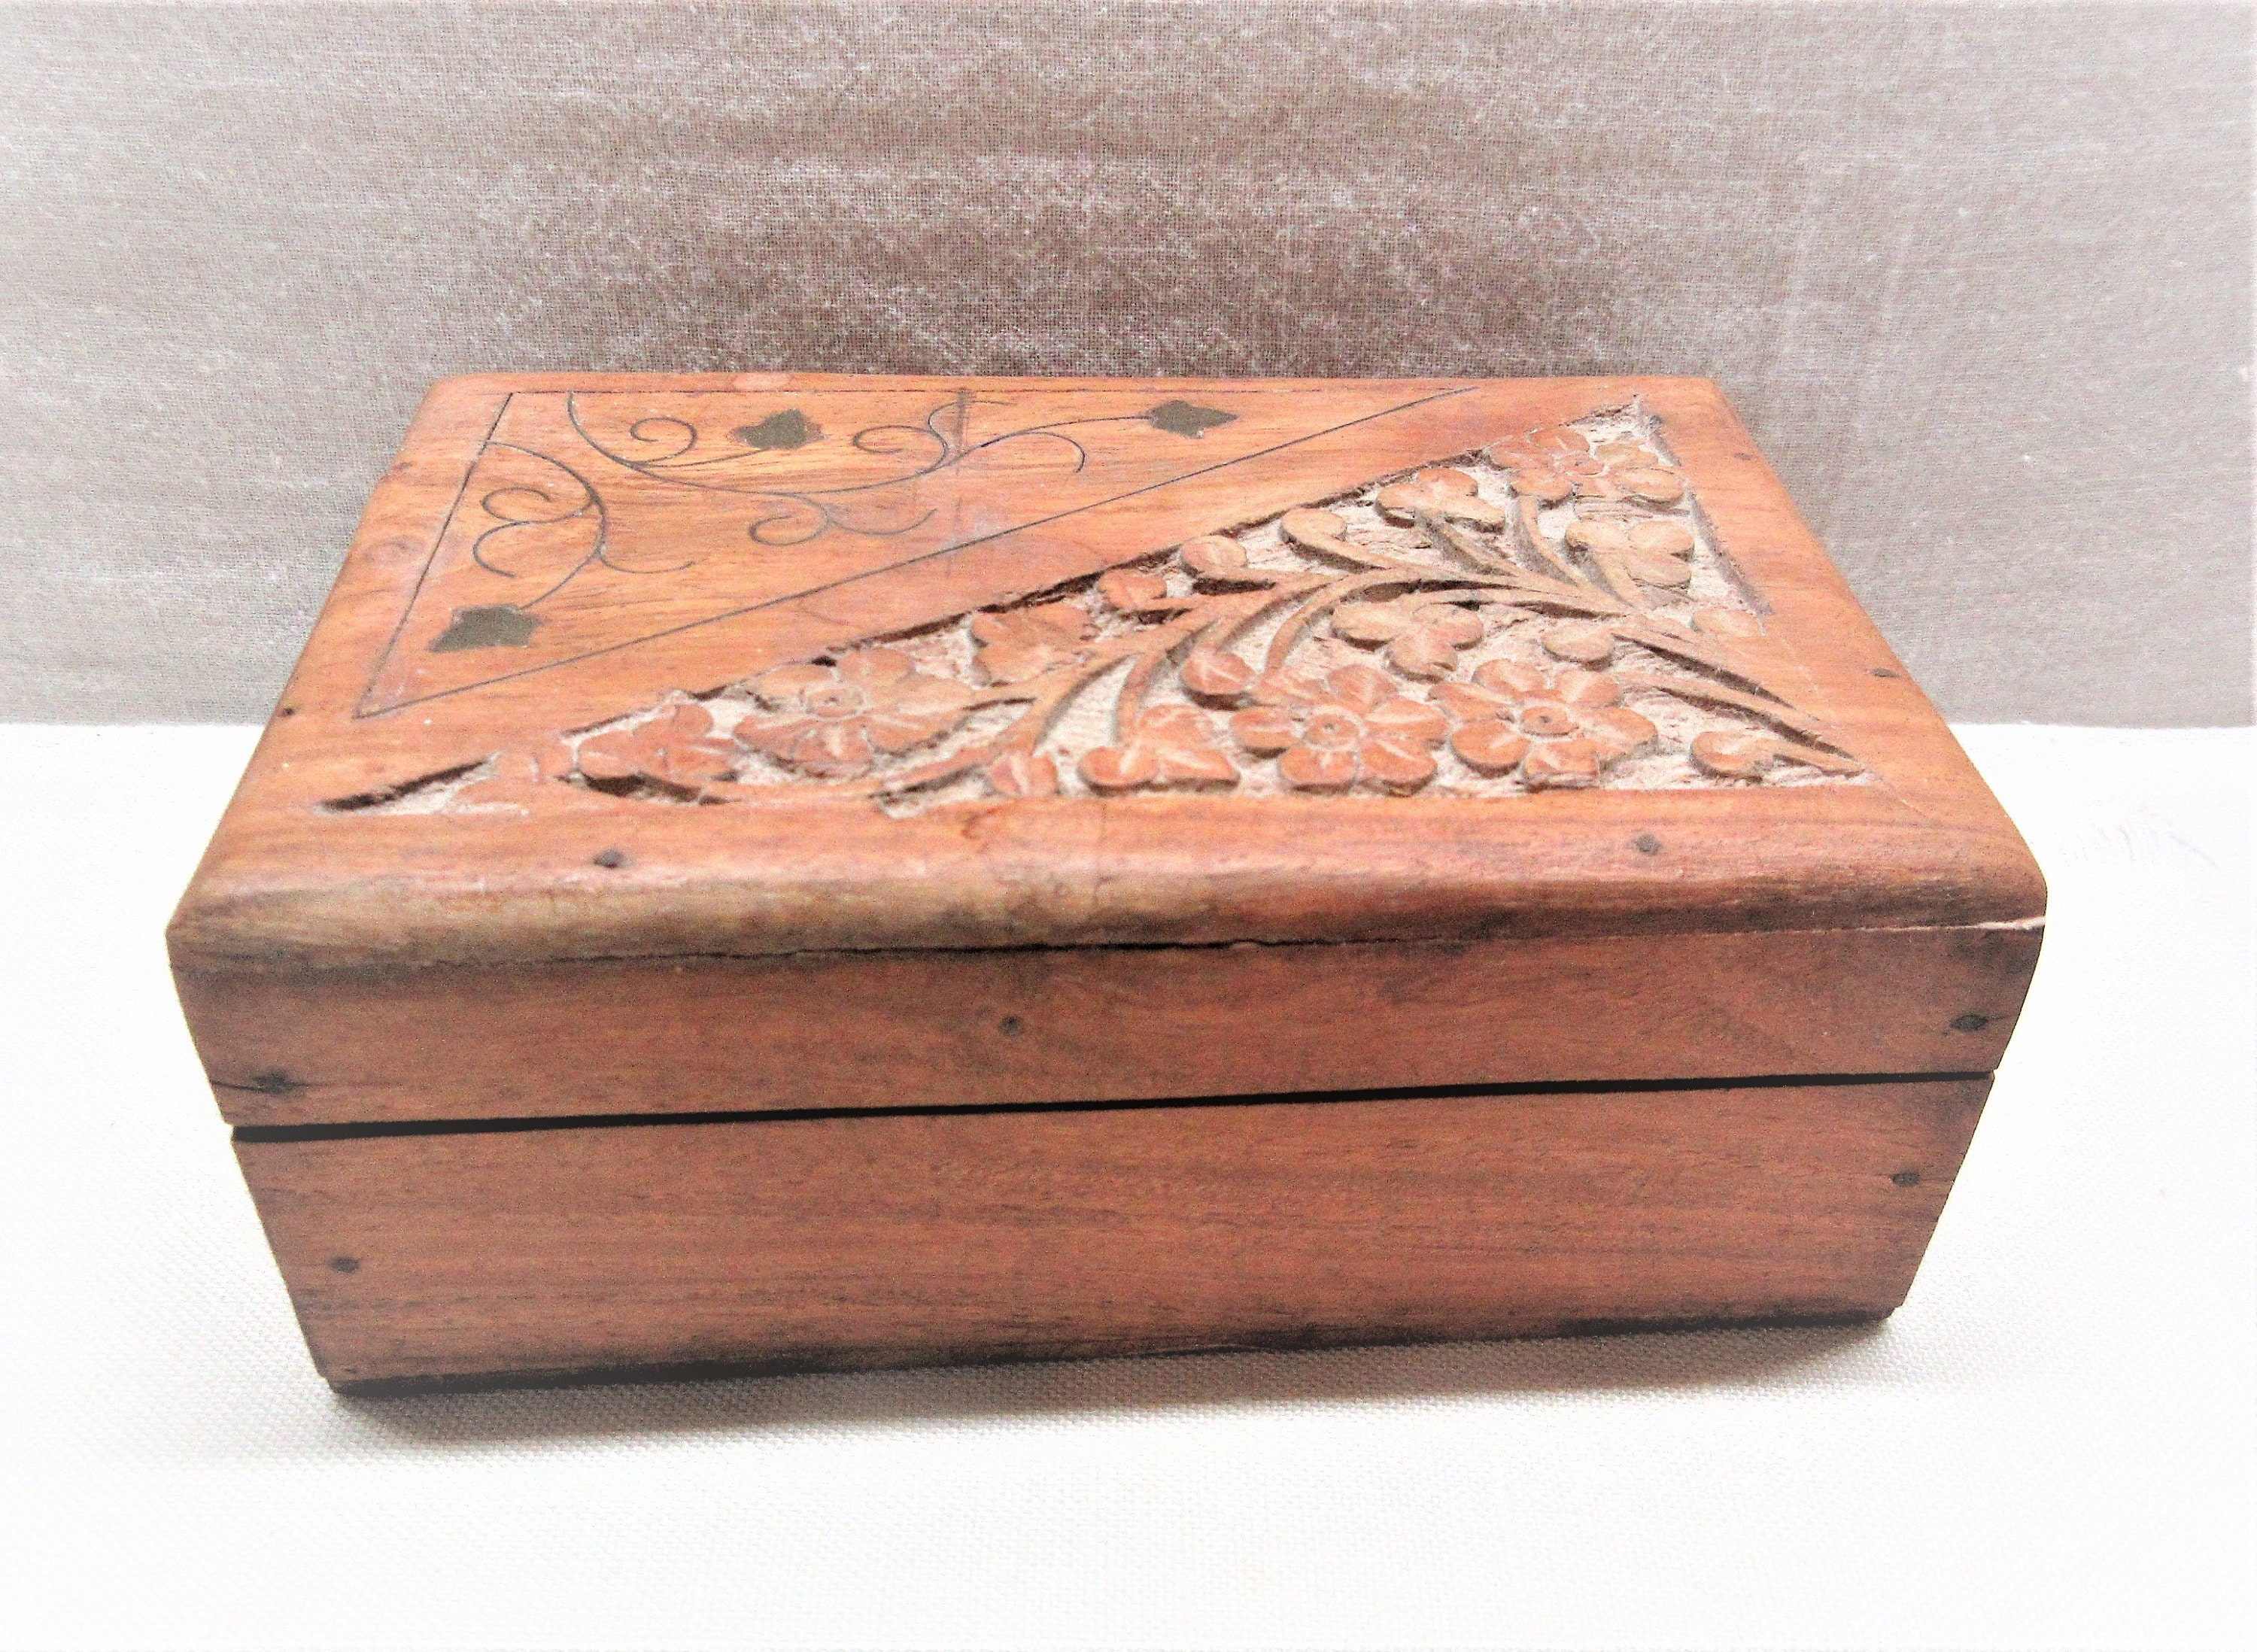 Small Wooden Jewelry Box - Indian Handmade Box With Brass Wire